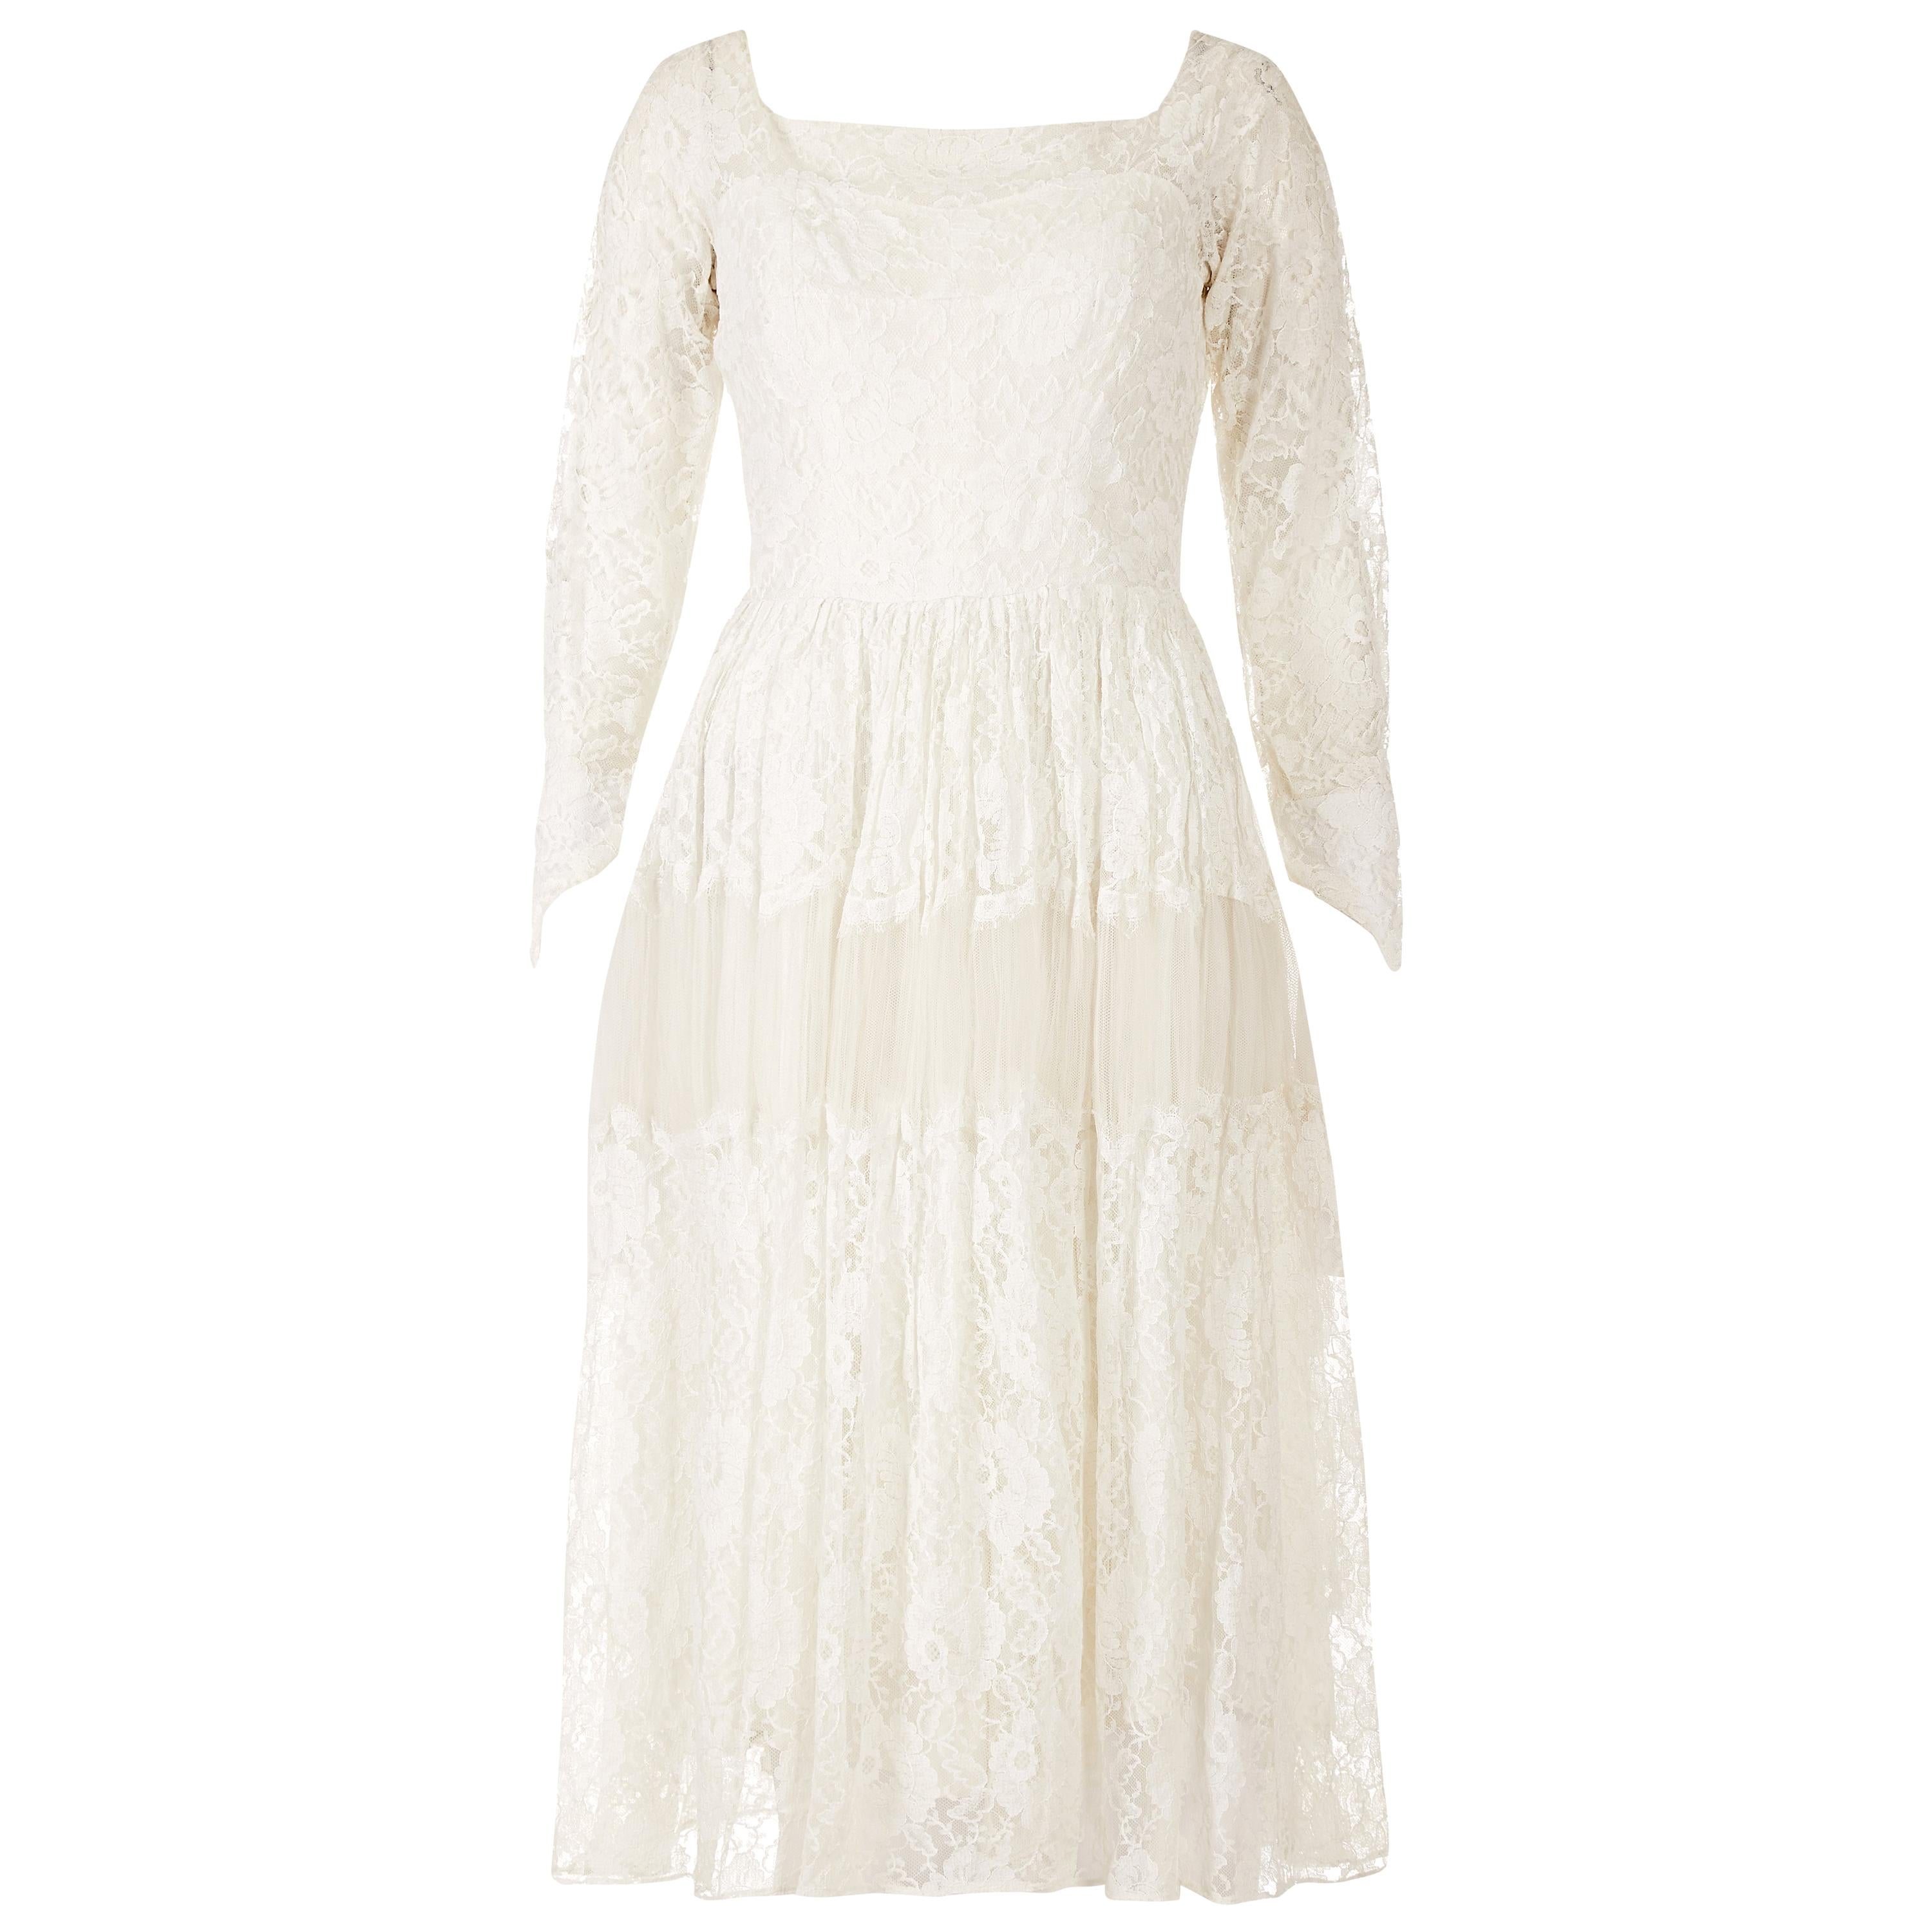 Late 1950s Early 1960s White Chantilly Style Lace Tiered Bridal Gown 